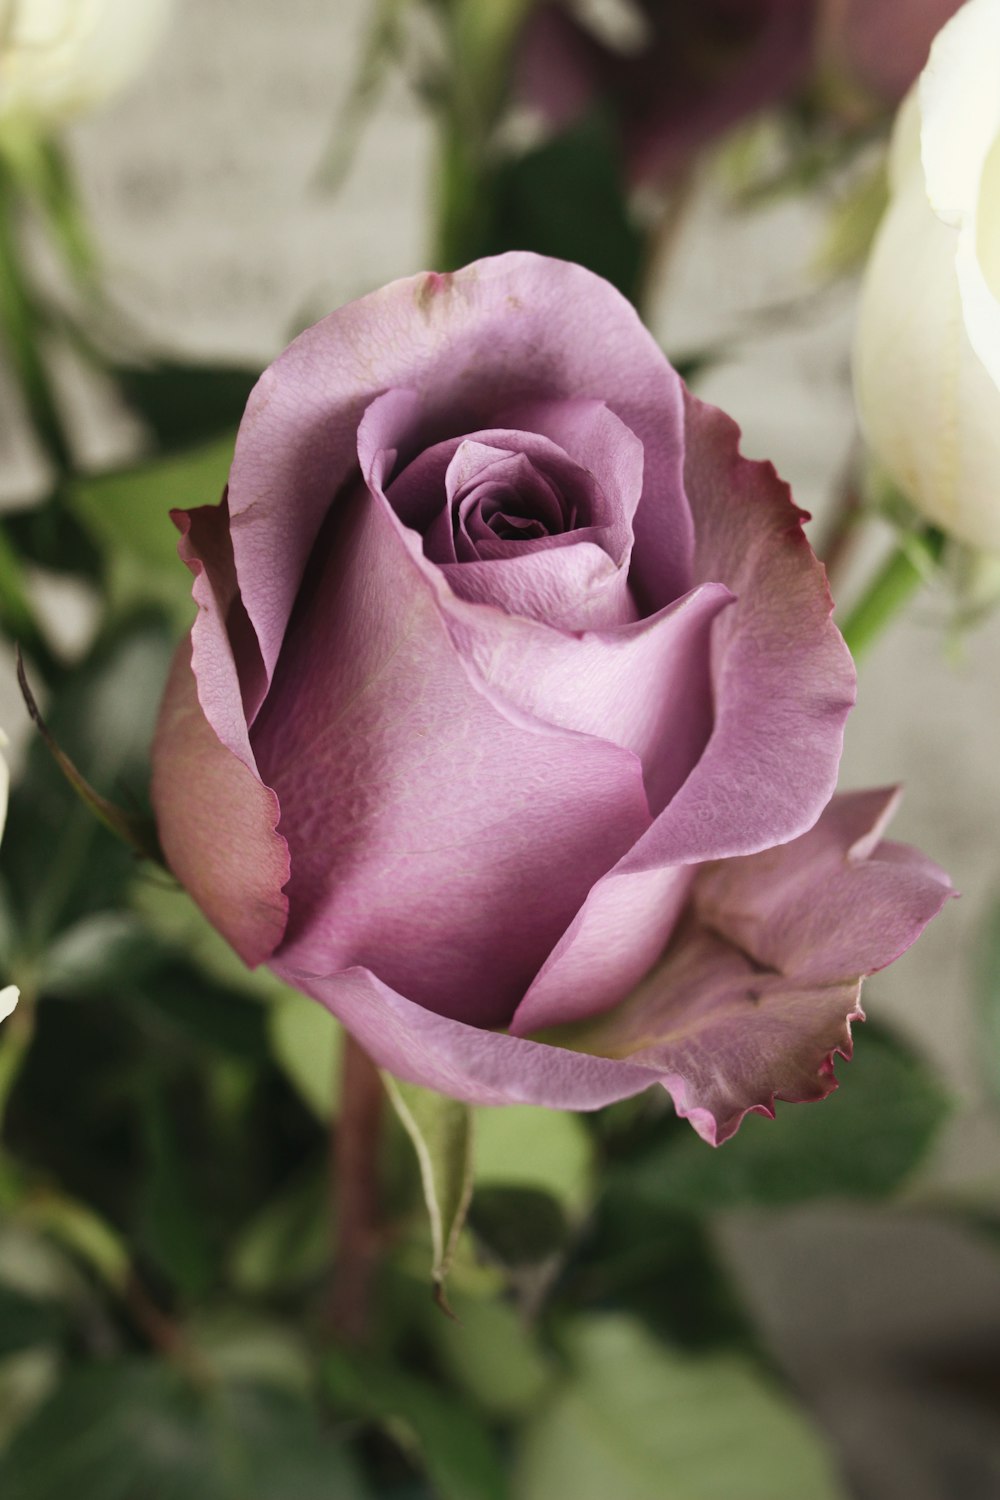 An Incredible Compilation of 999+ High-Quality Purple Rose Photos in Full 4K Resolution